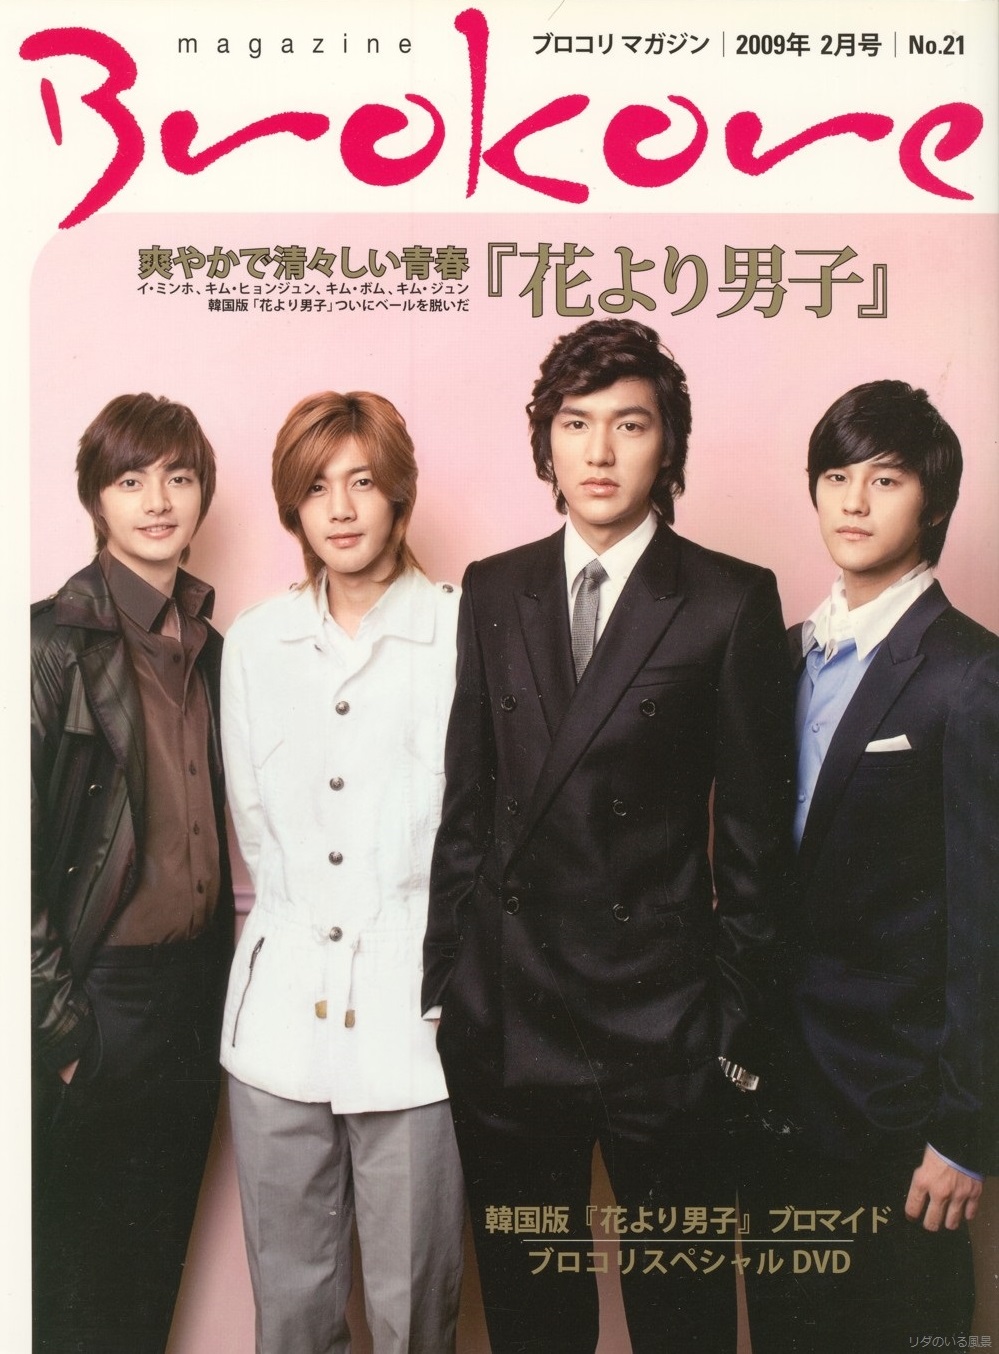 This Is The February Issue - Ziff Senior Appearance No.21 2009 Years Brokore Magazine